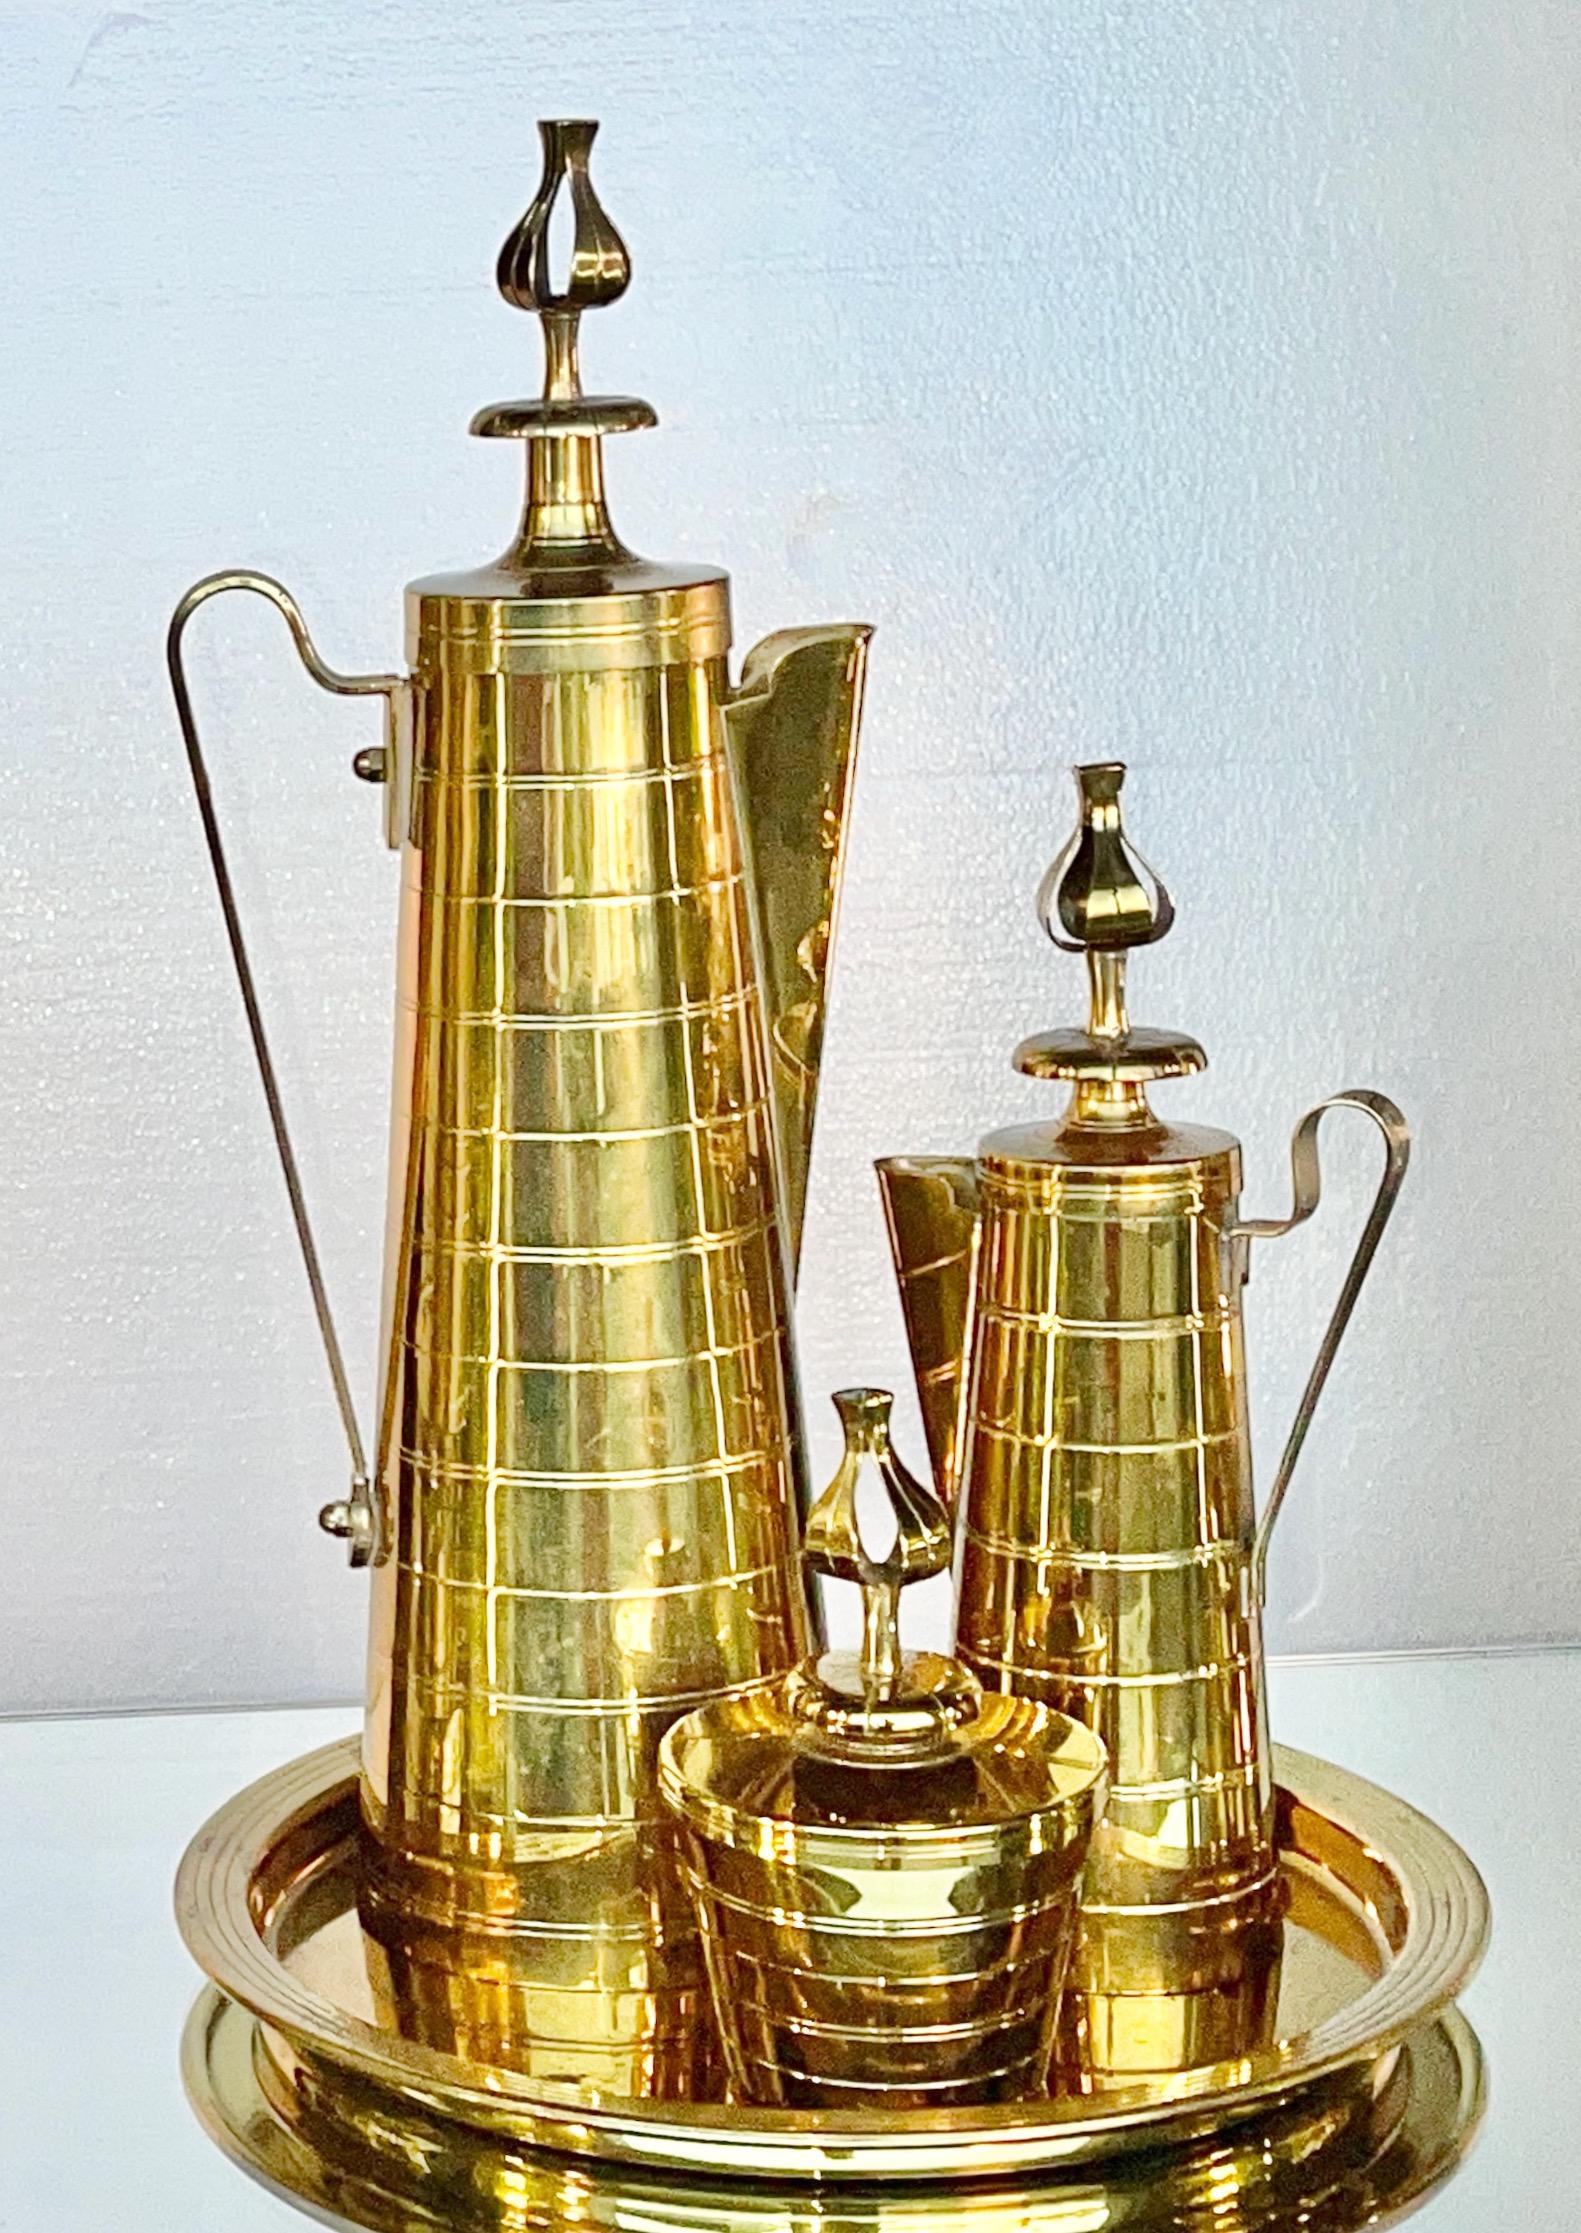 Four piece coffee/tea service in solid brass designed by Tommi Parzinger for Dorlyn Silversmiths circa 1950, distributed by Vincent Lippe Co.
This is the earliest version with the distinctively ornate thistle finials on the fitted lids.
Set includes